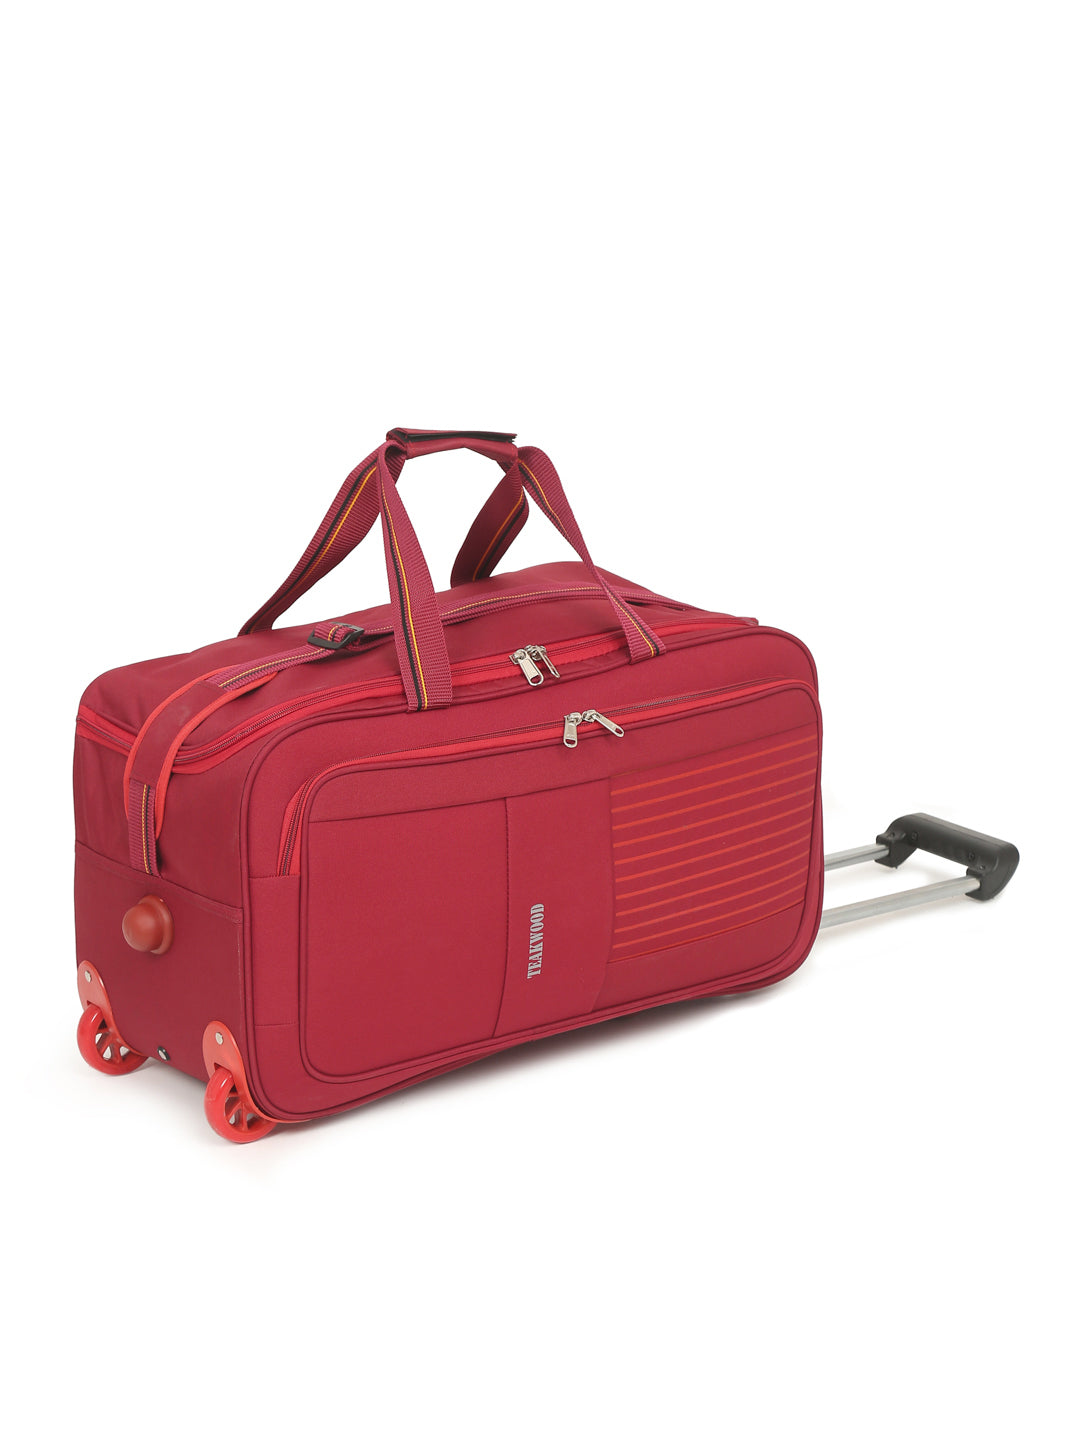 Amazon.com: REDCAMP 85L Foldable Duffle Bag with Wheels 26